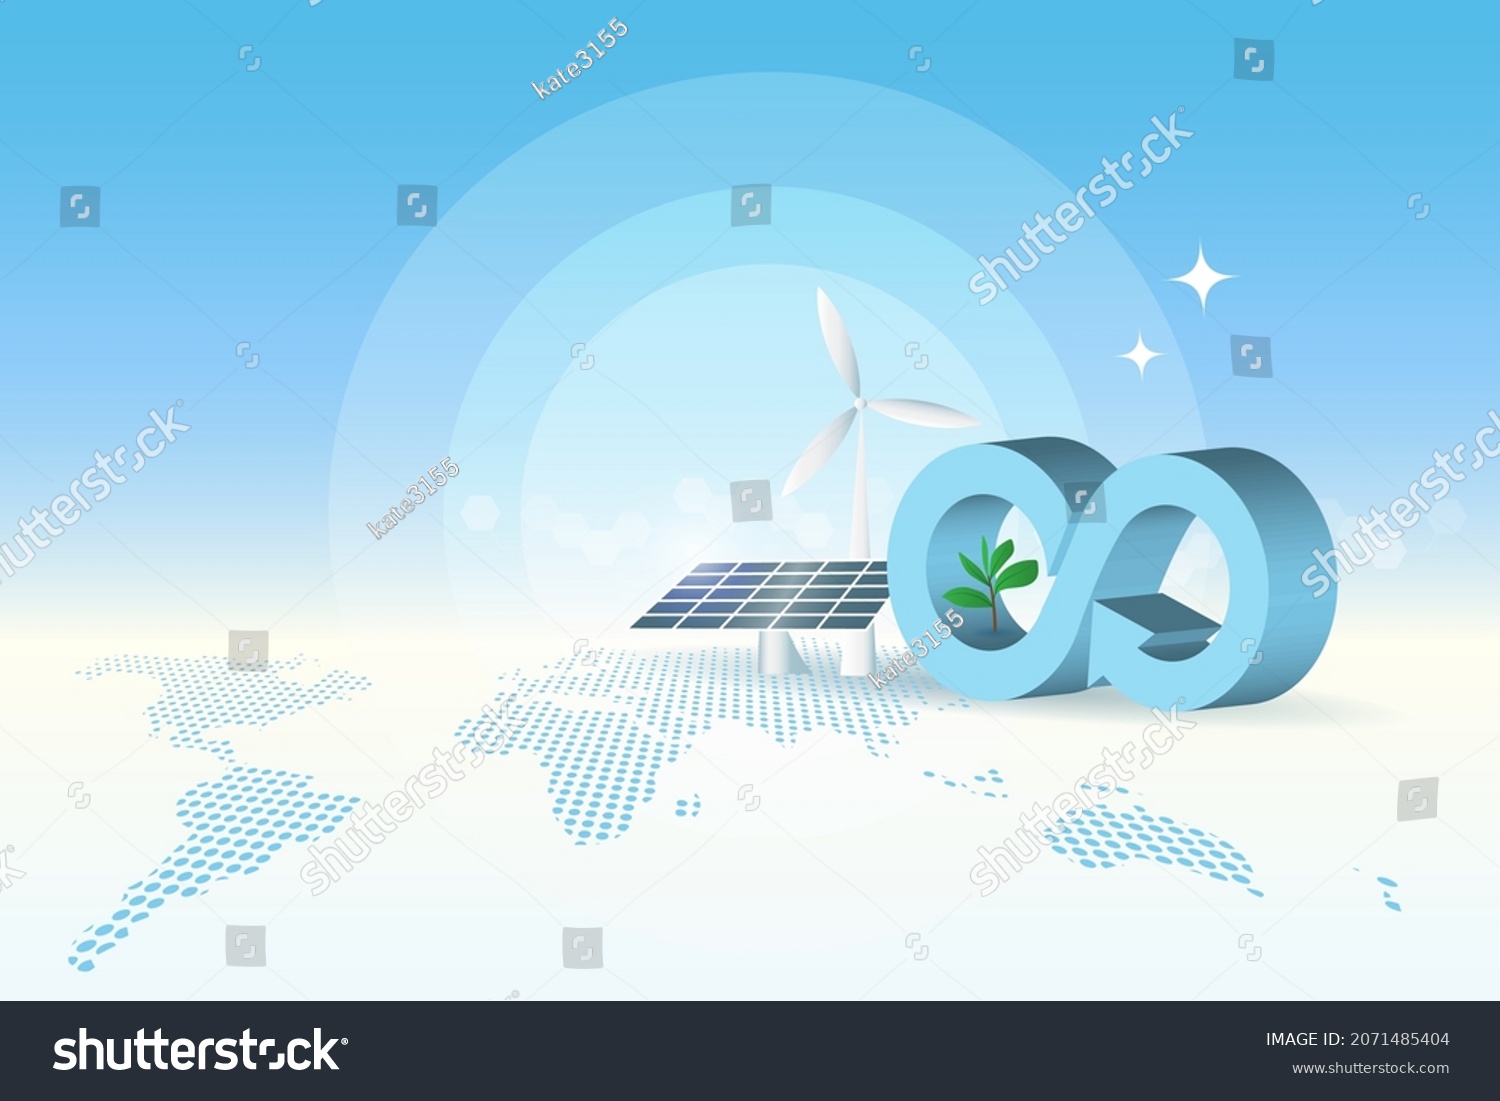 Circular economy logo with wind turbines and solar panel on world map background. For sustainable strategy goal of eliminating waste and pollution, renewable and reuse natural resources. #2071485404